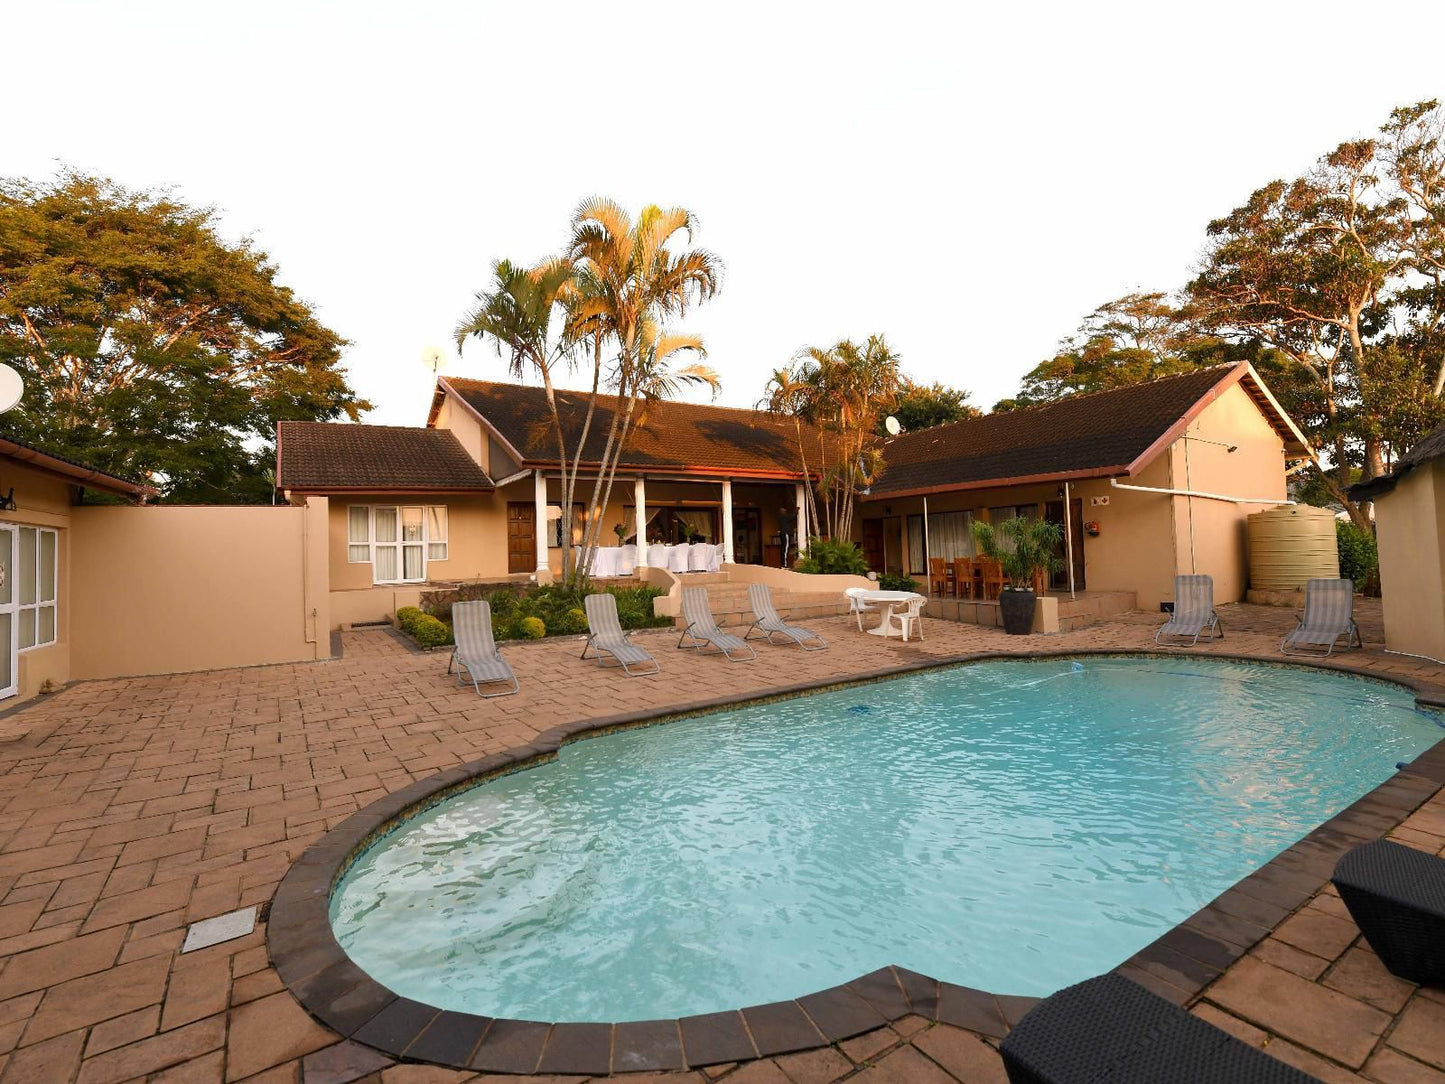 Ihawu Guest House Westville Durban Kwazulu Natal South Africa House, Building, Architecture, Palm Tree, Plant, Nature, Wood, Swimming Pool